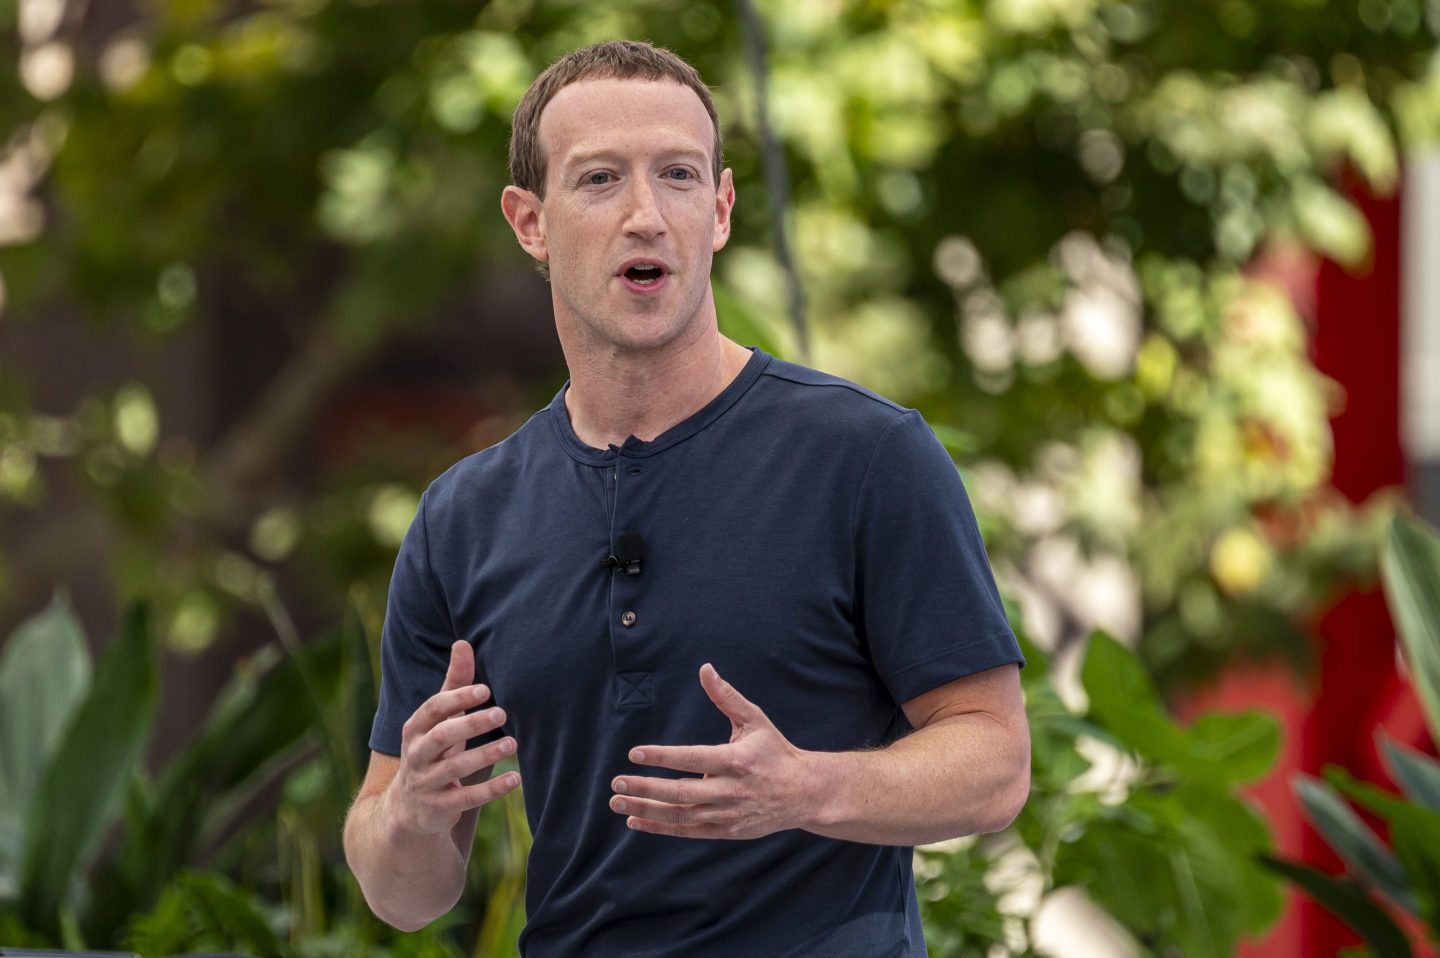 Mark Zuckerberg wears a dark t-shirt with a mic clipped on it and is outside, speaking.